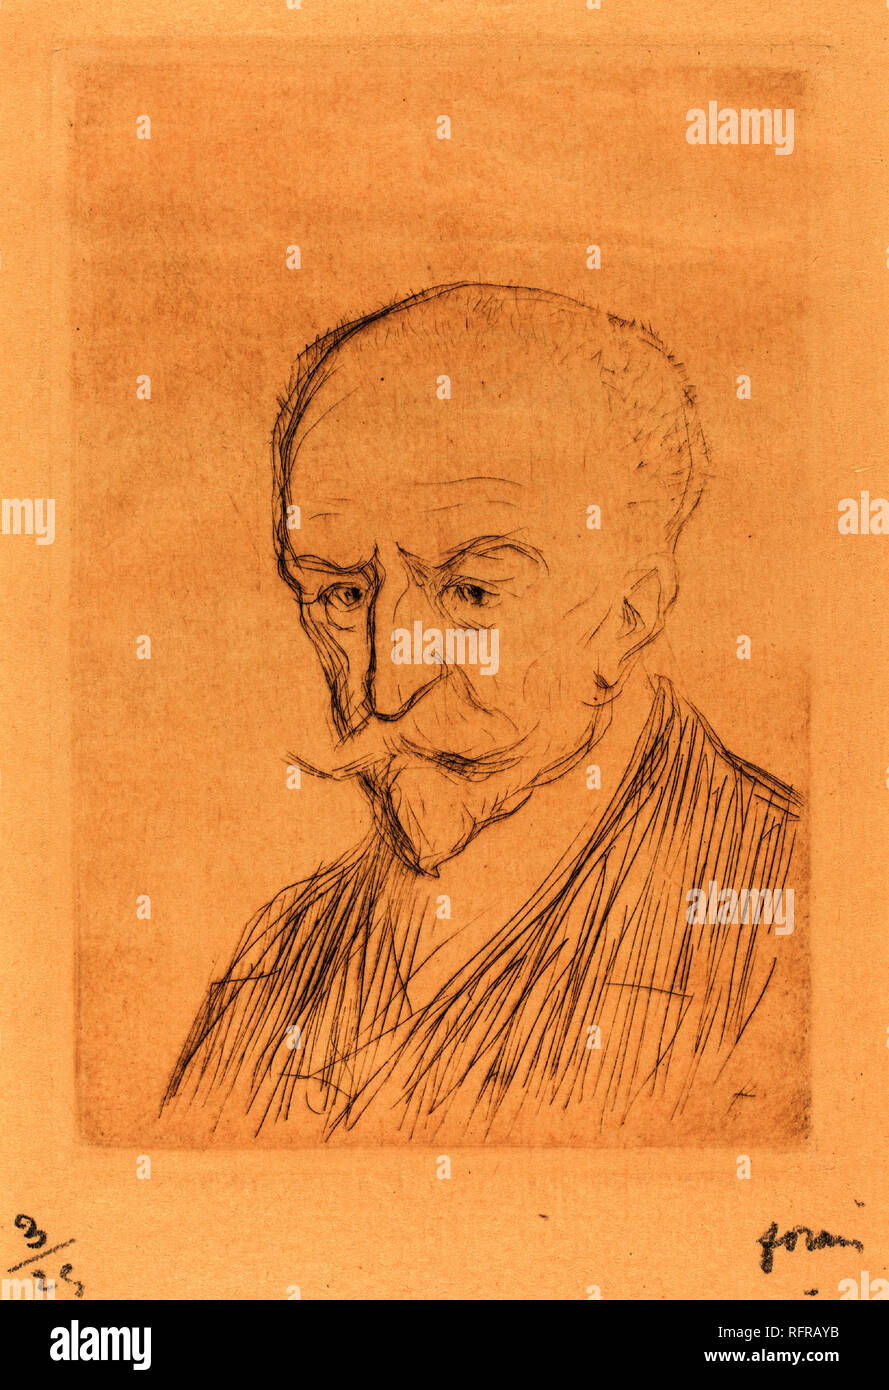 J.-K. Huysmans. Dated: 1909. Medium: etching. Museum: National Gallery of Art, Washington DC. Author: FORAIN, JEAN LOUIS. Stock Photo